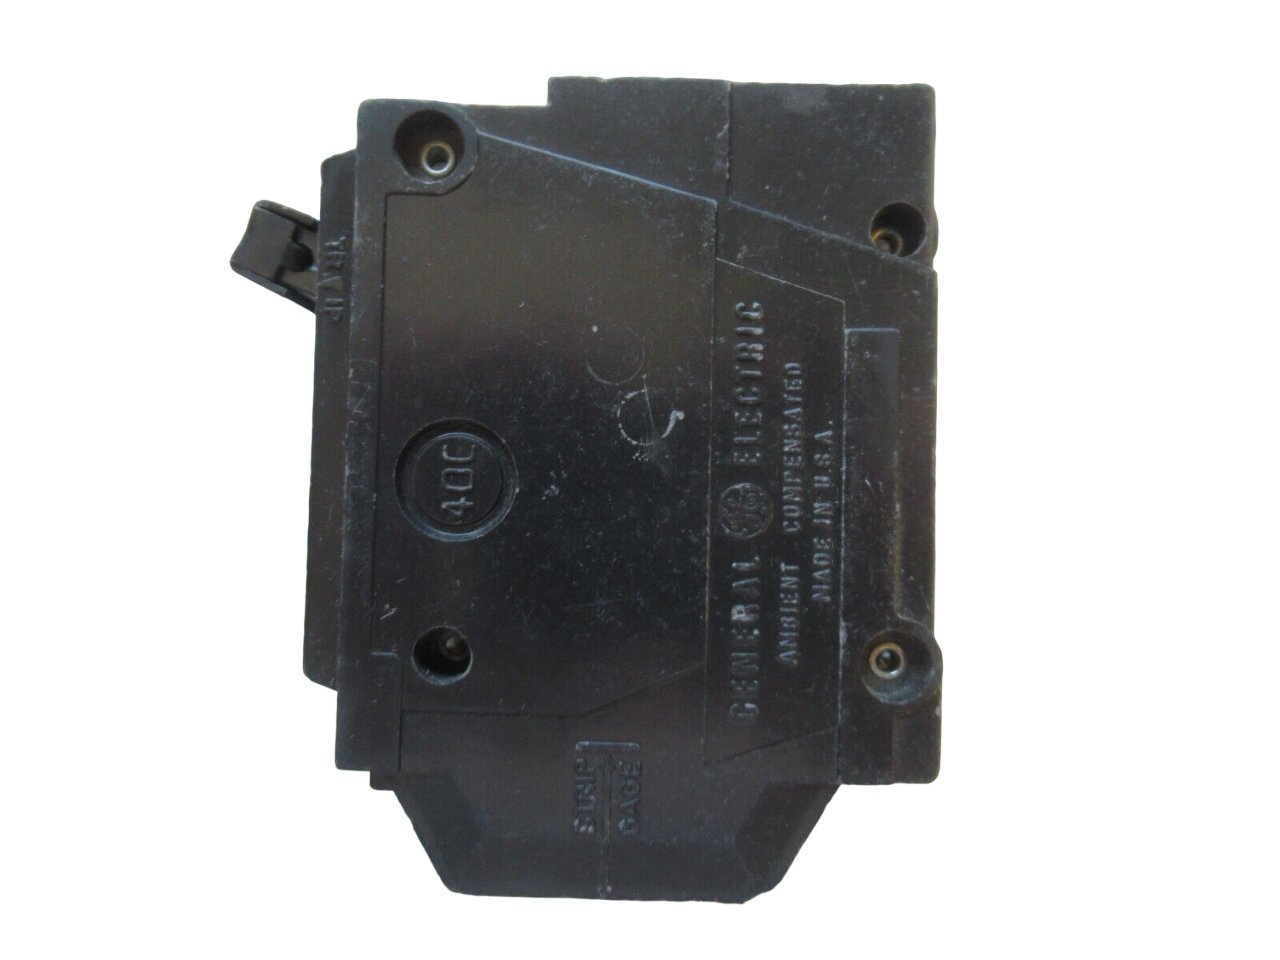 THHQL32050 - General Electrics - Molded Case Circuit Breakers